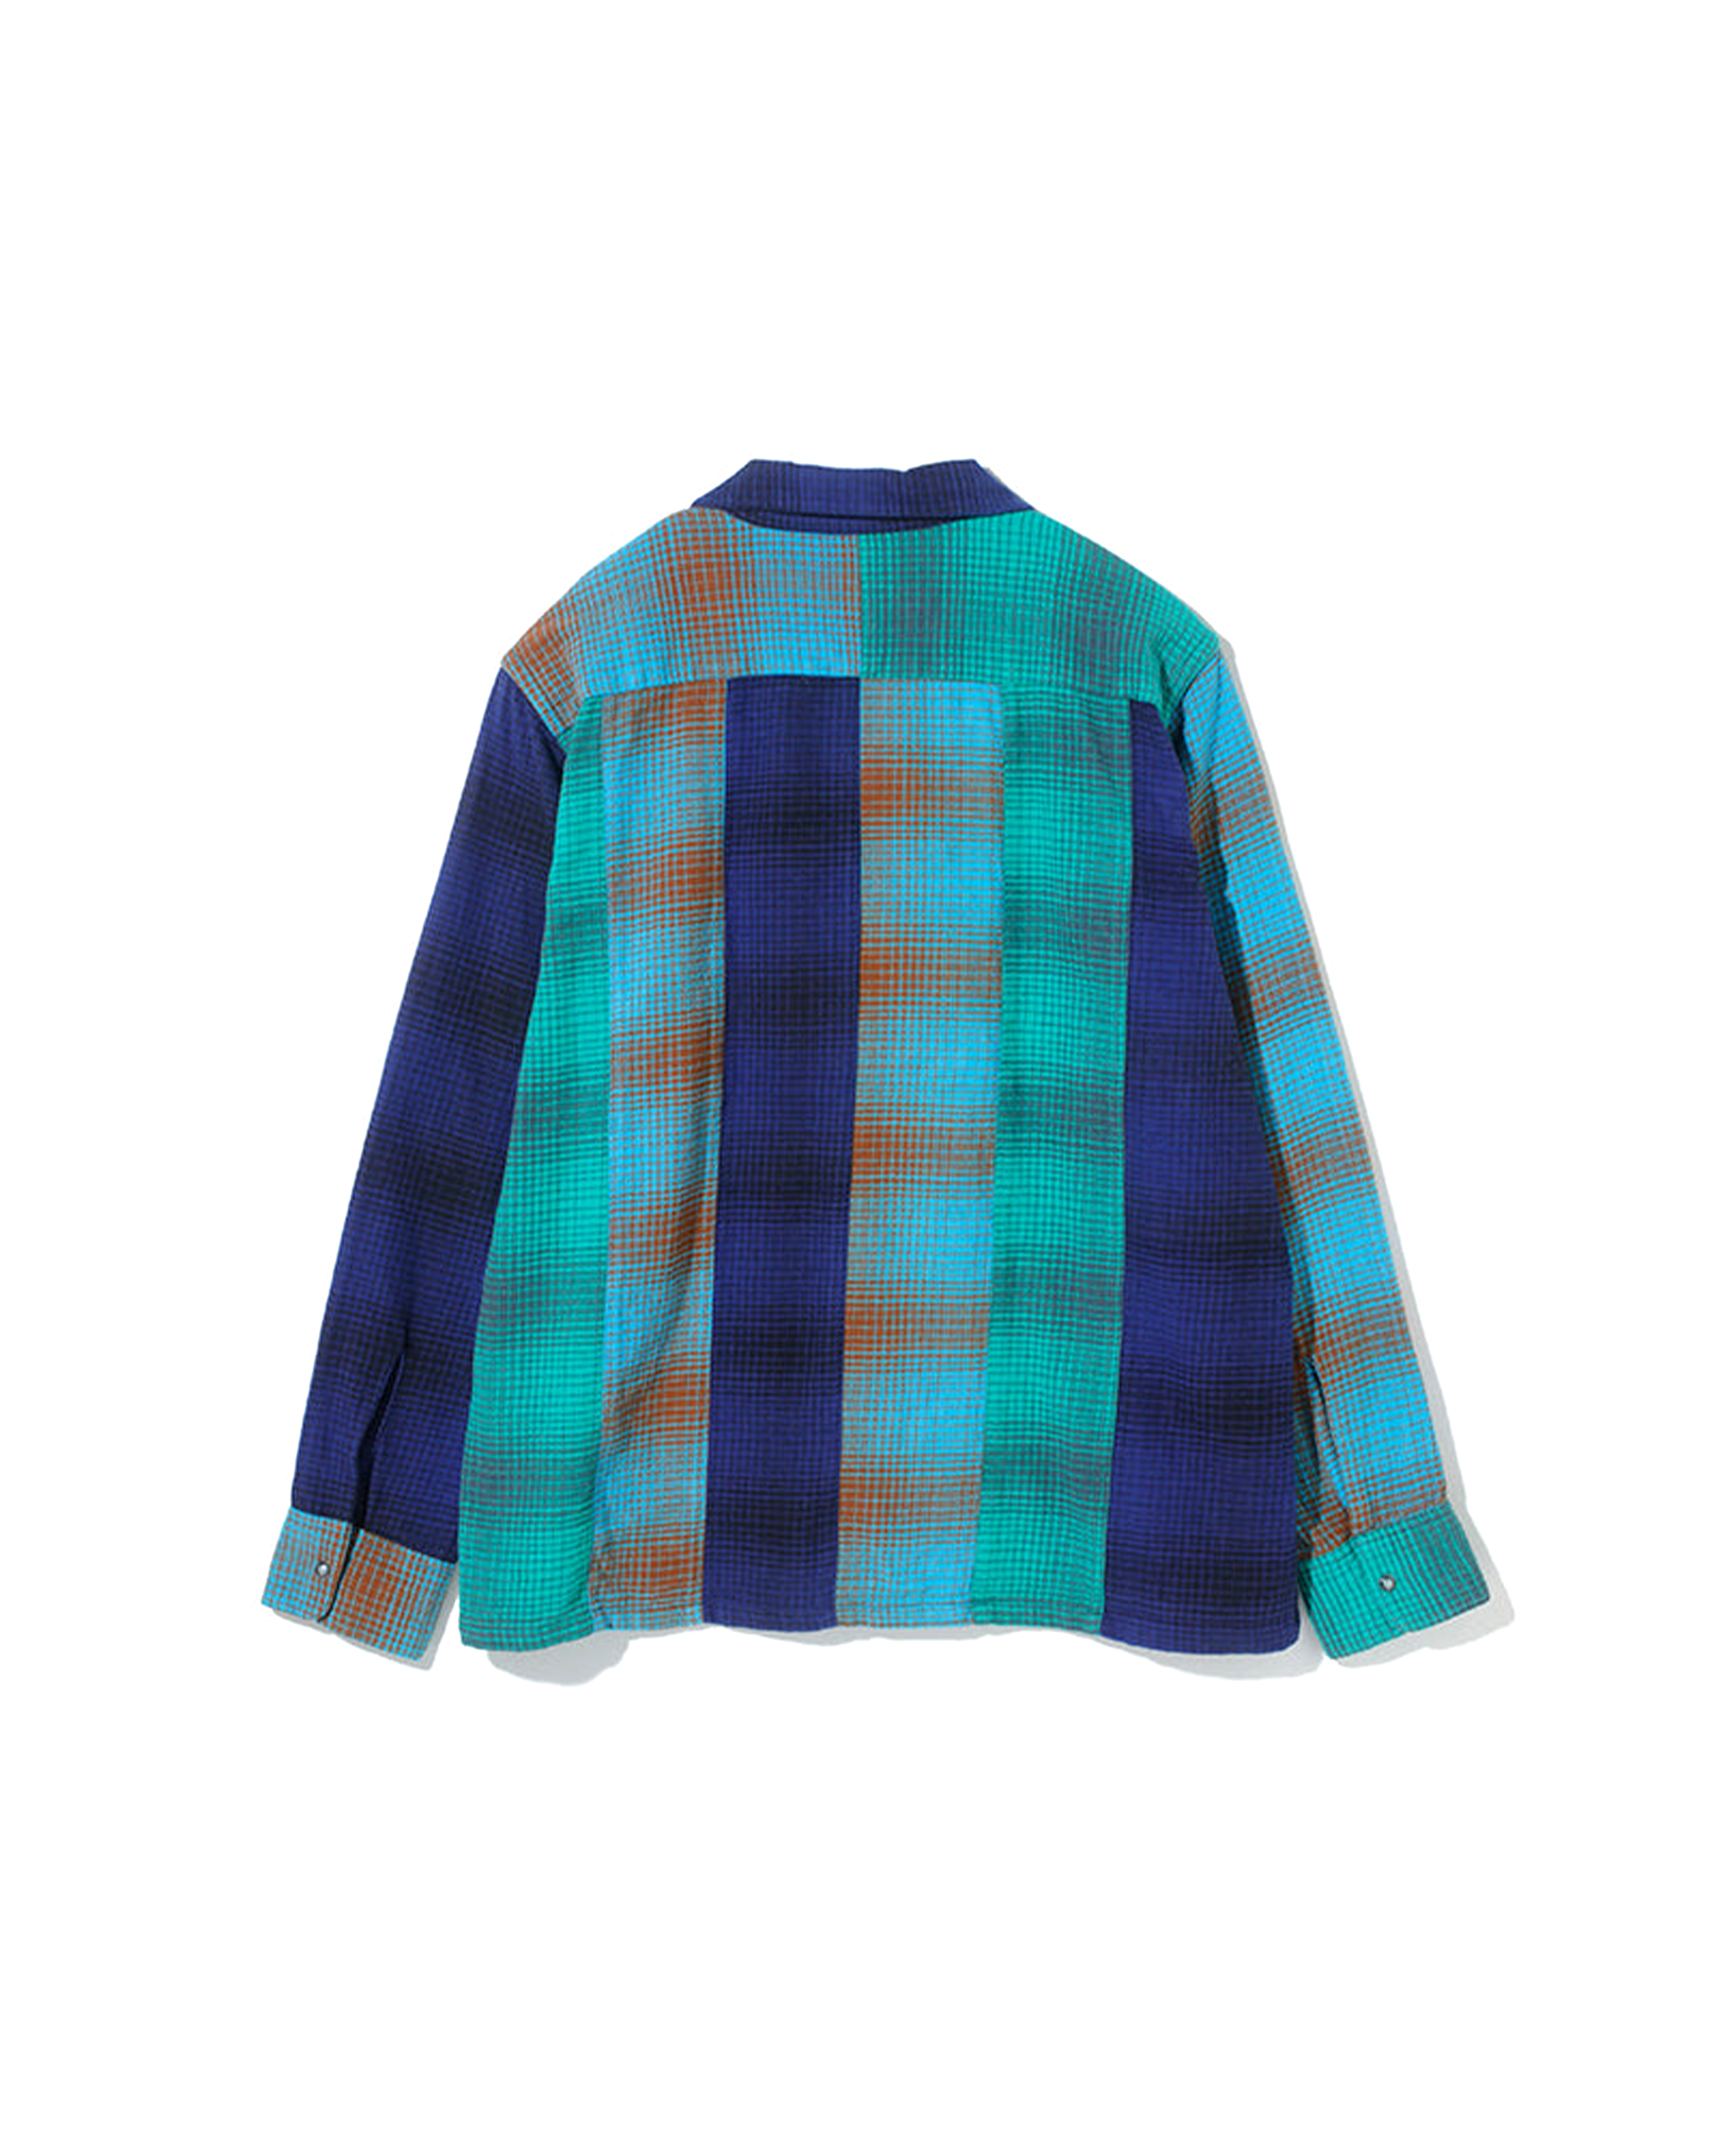 Ombre Plaid Patchwork Shirt - Navy / Emerald / Water